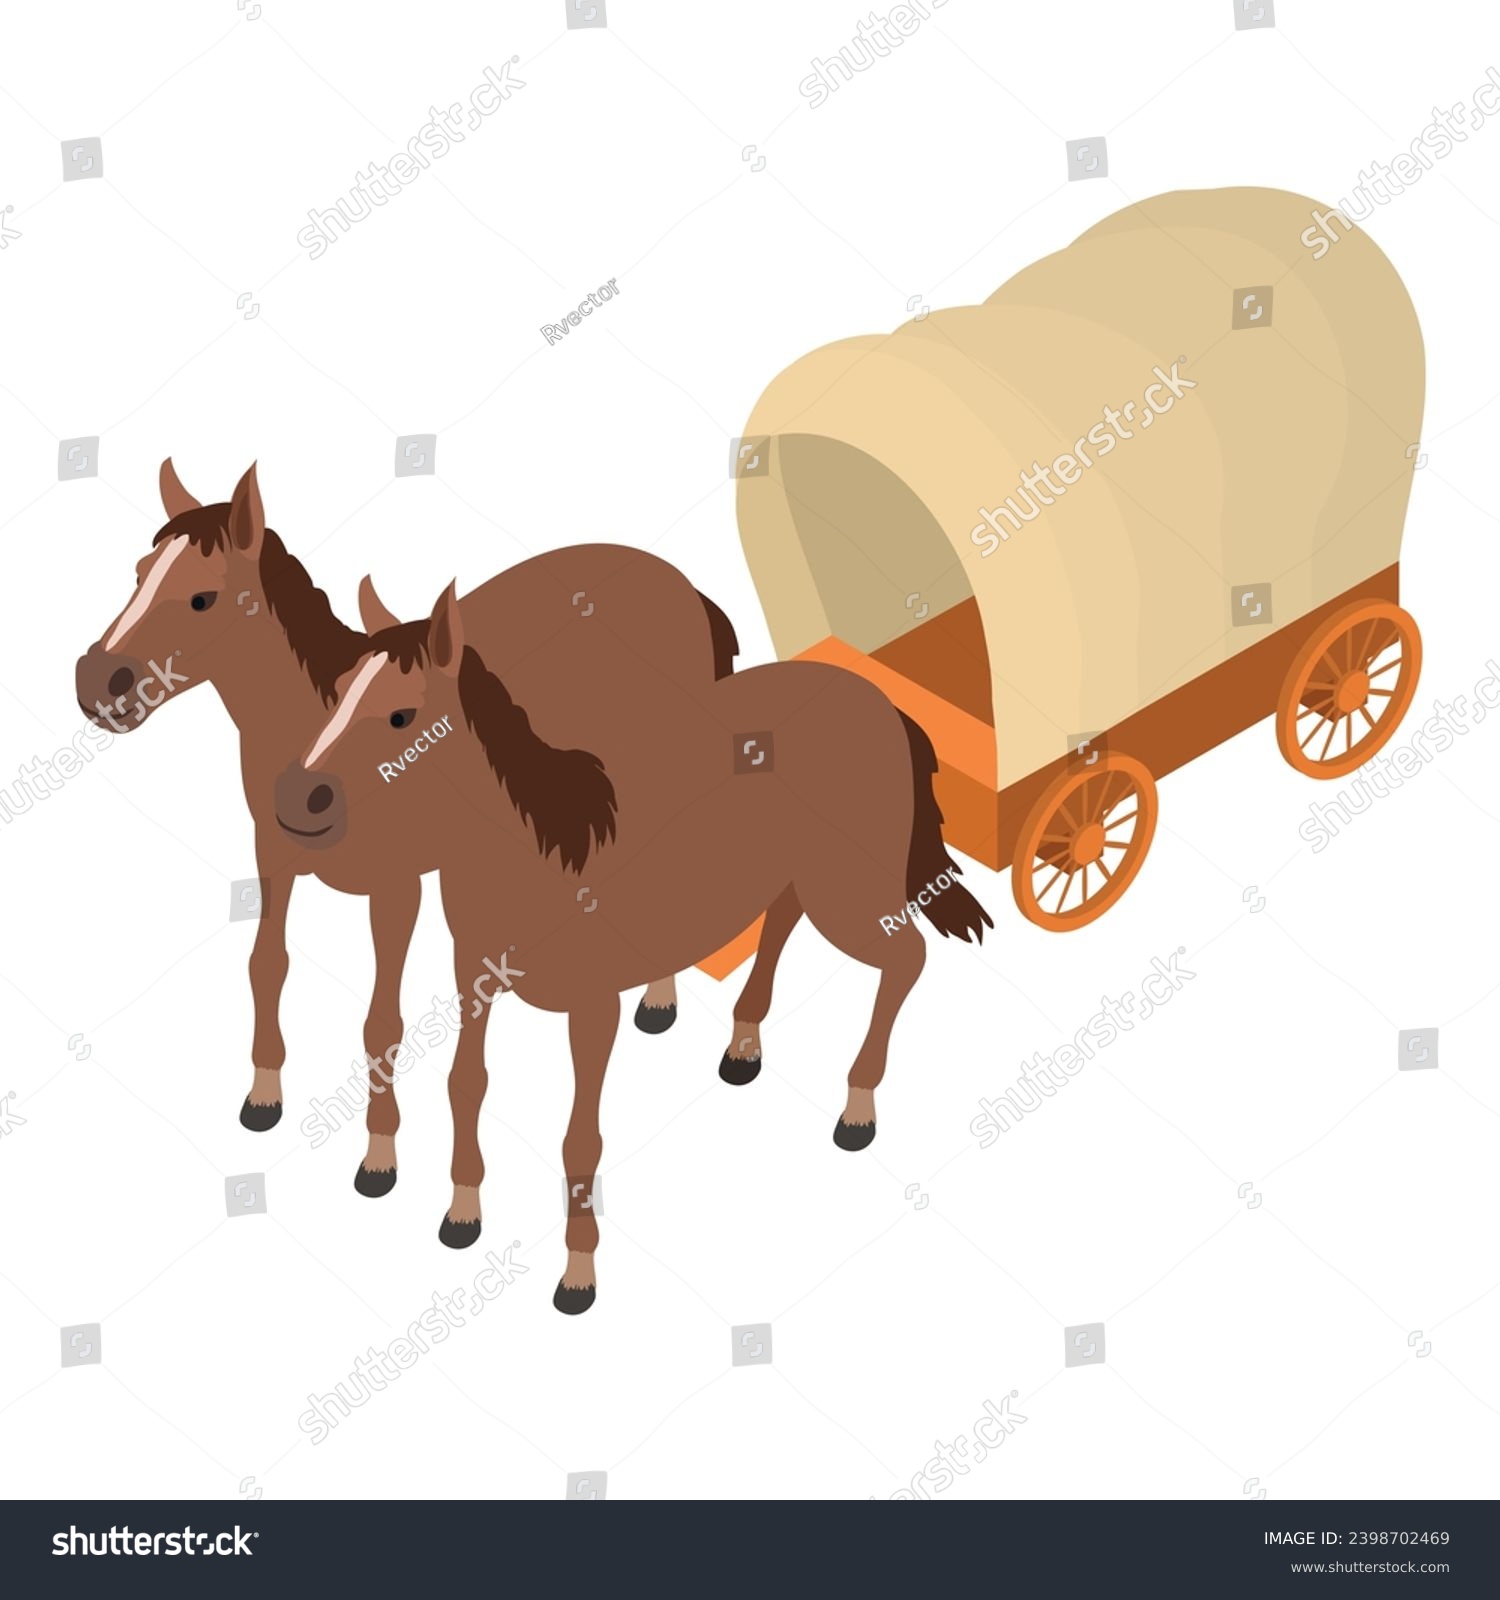 SVG of Vintage wagon icon isometric vector. Wild west covered wood wagon drawn by horse. Wild west carriage svg